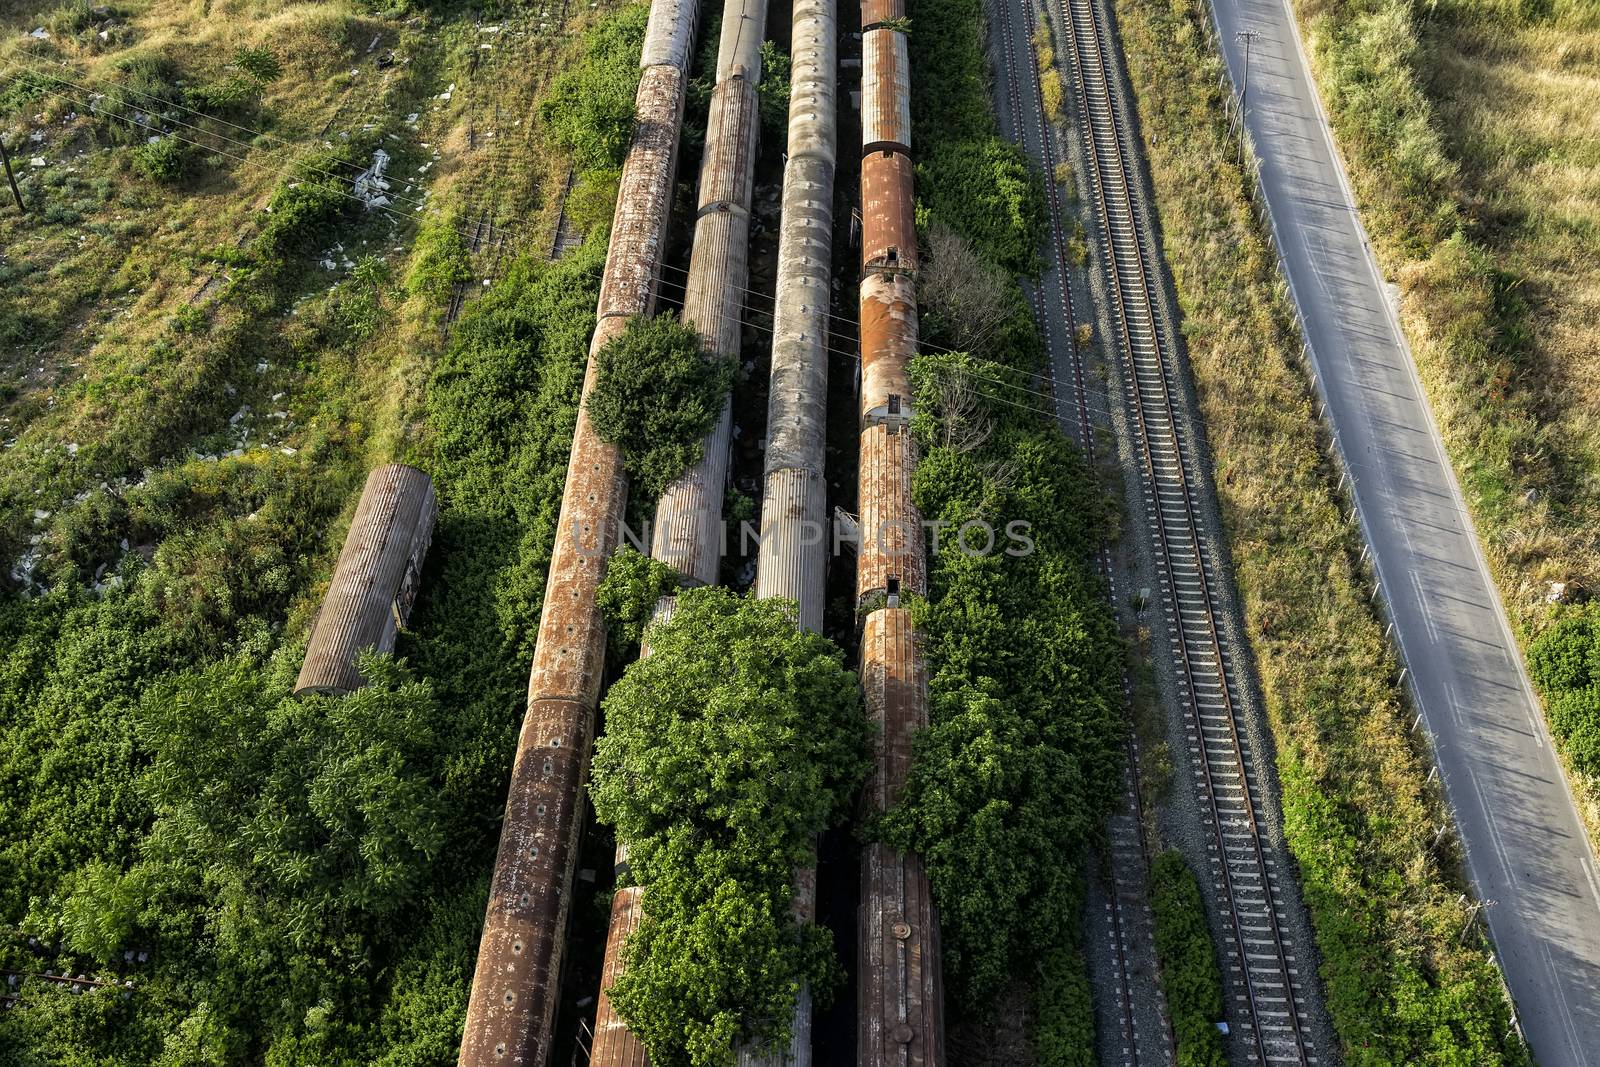 Aerial view of cemetery trains in Nea Ionia, Thessaloniki